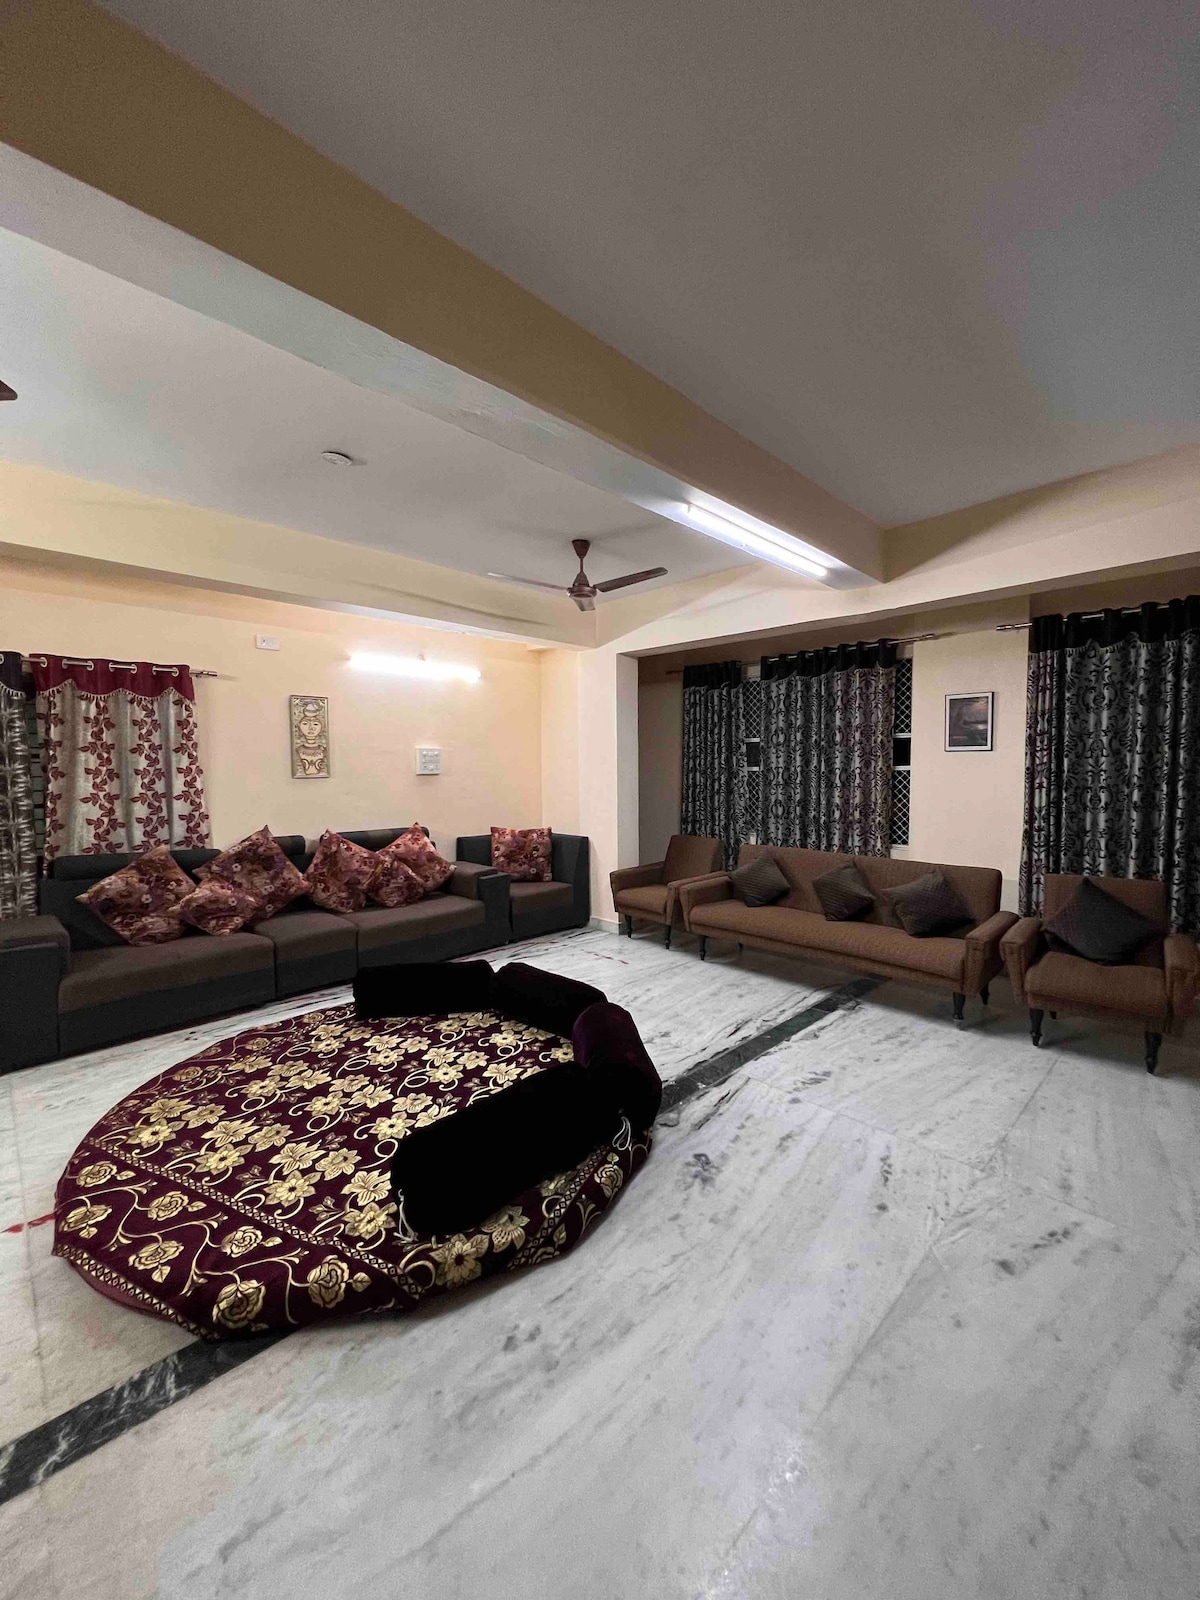 Lovely4 bedroom furnished apt ideal fr small party